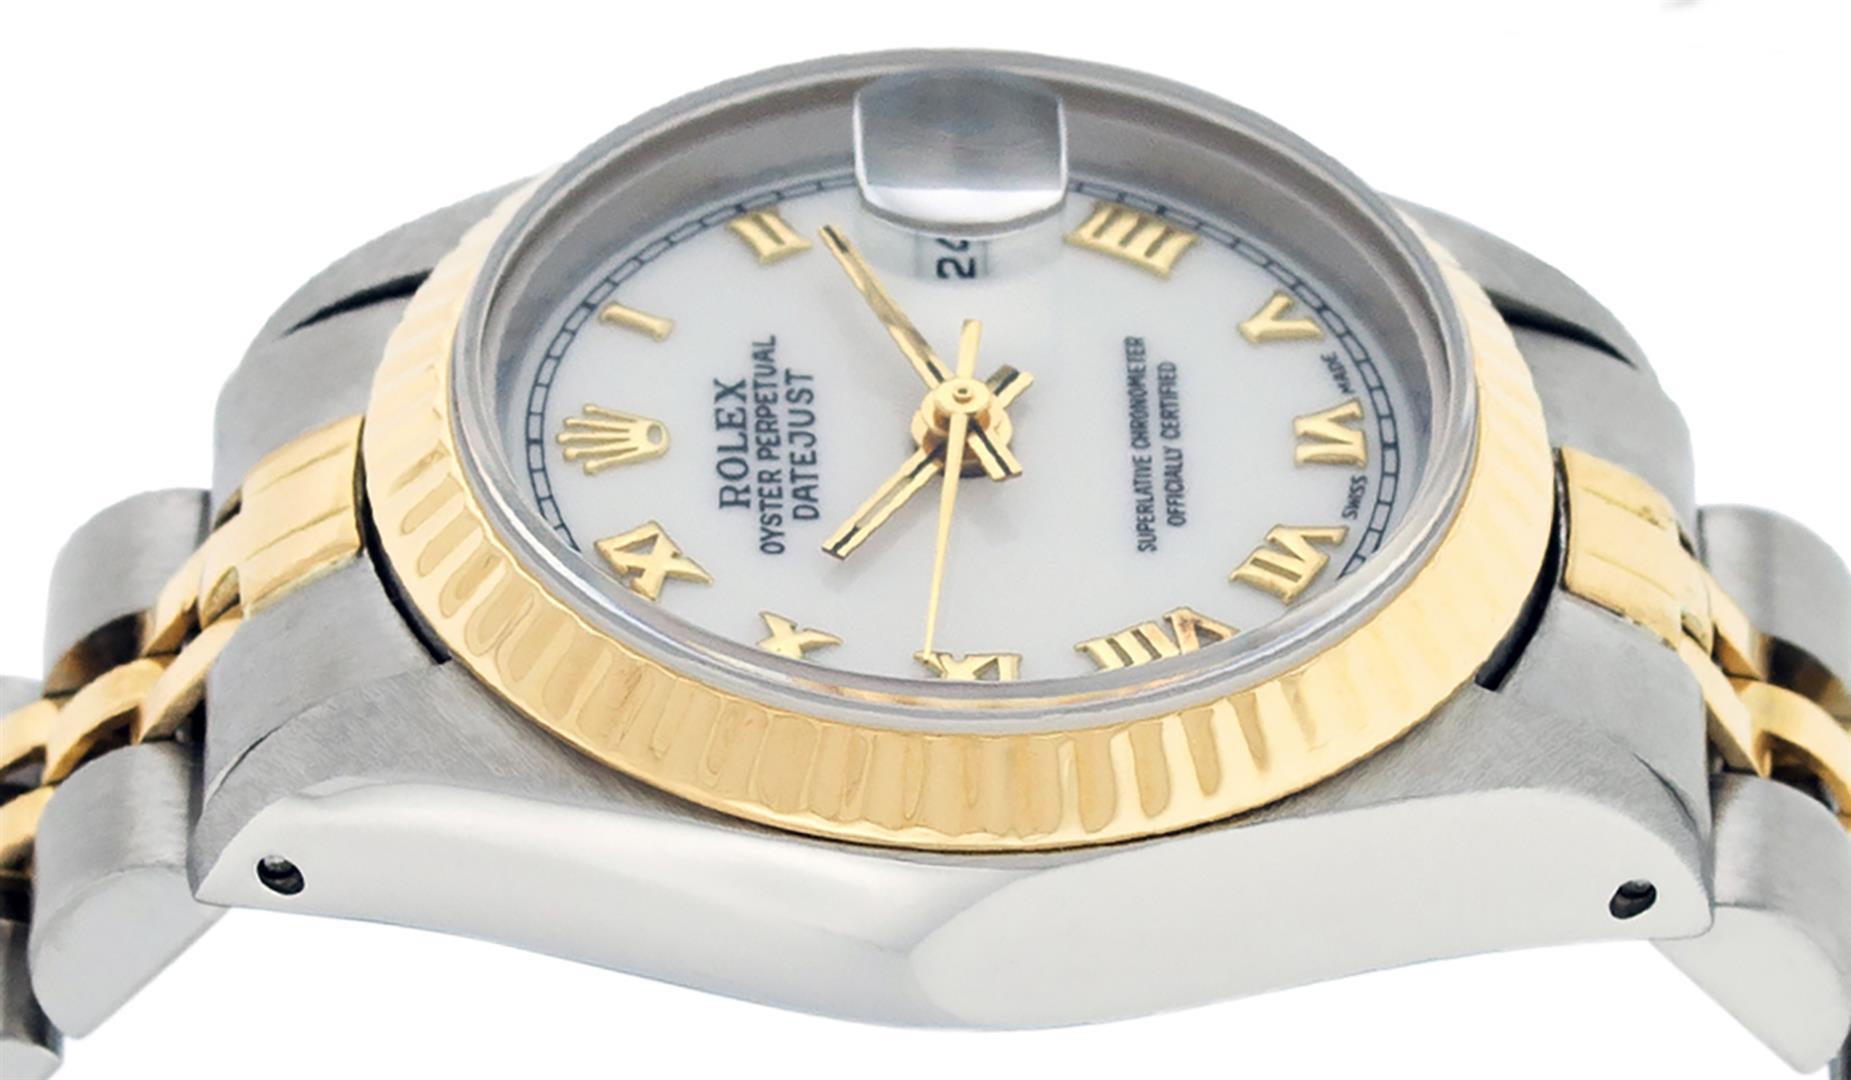 Rolex Ladies 2 Tone Yellow Gold & Stainless Steel White Roman 26MM Oyster Perpet